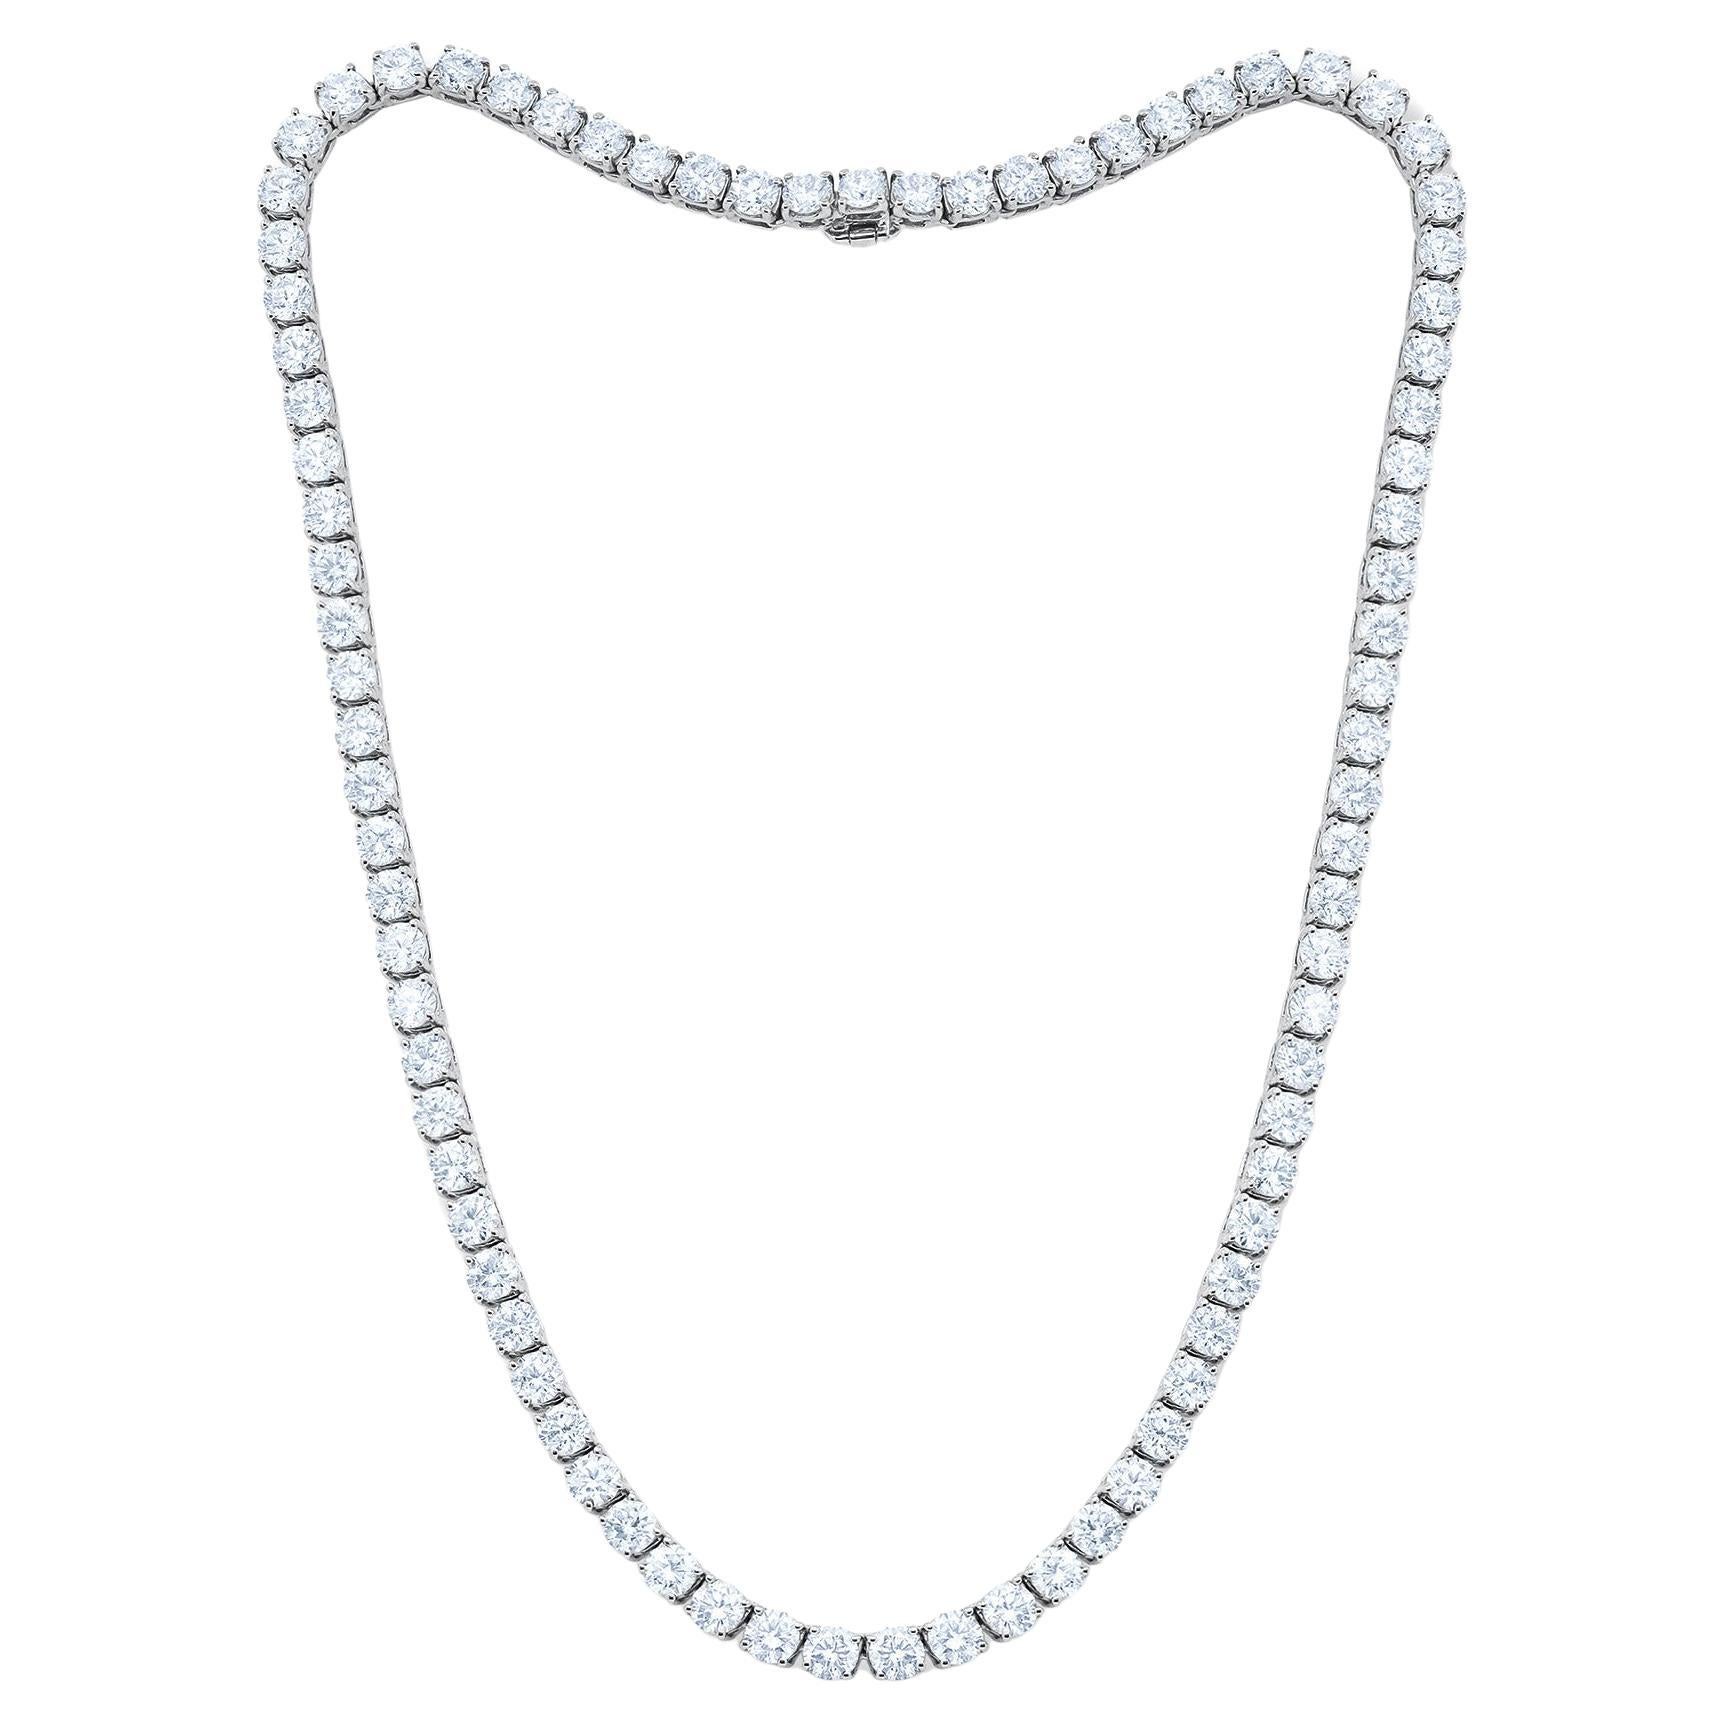 Diana M. 18 kt white gold, 16" 4 prong diamond tennis necklace featuring 28.40 